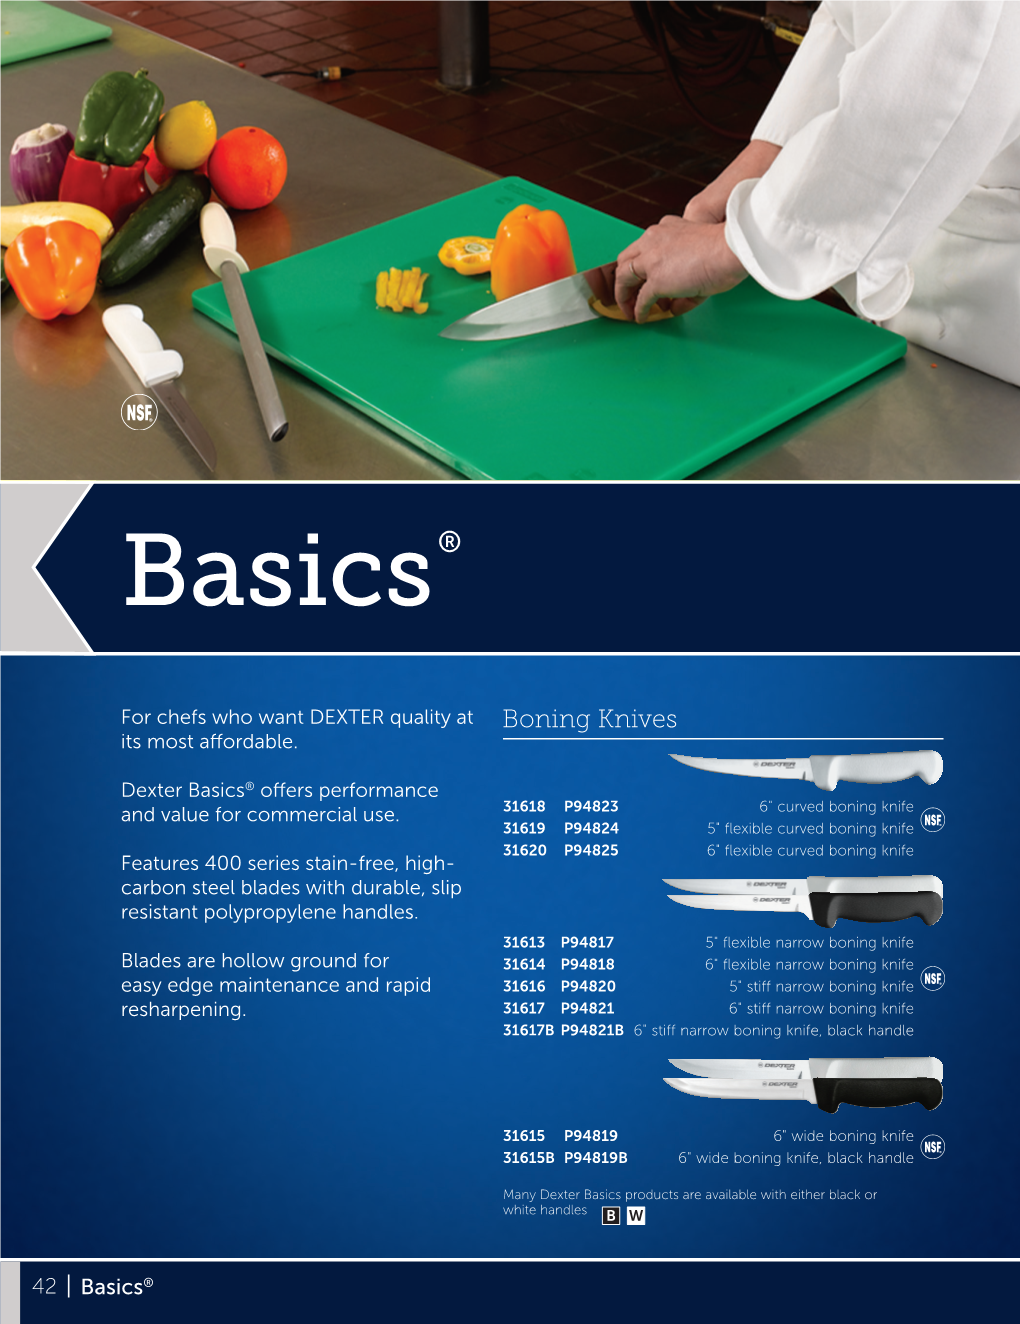 Basics® Offers Performance Cook’S Knives 31618 P94823 6" Curved Boning Knife and Value for Commercial Use